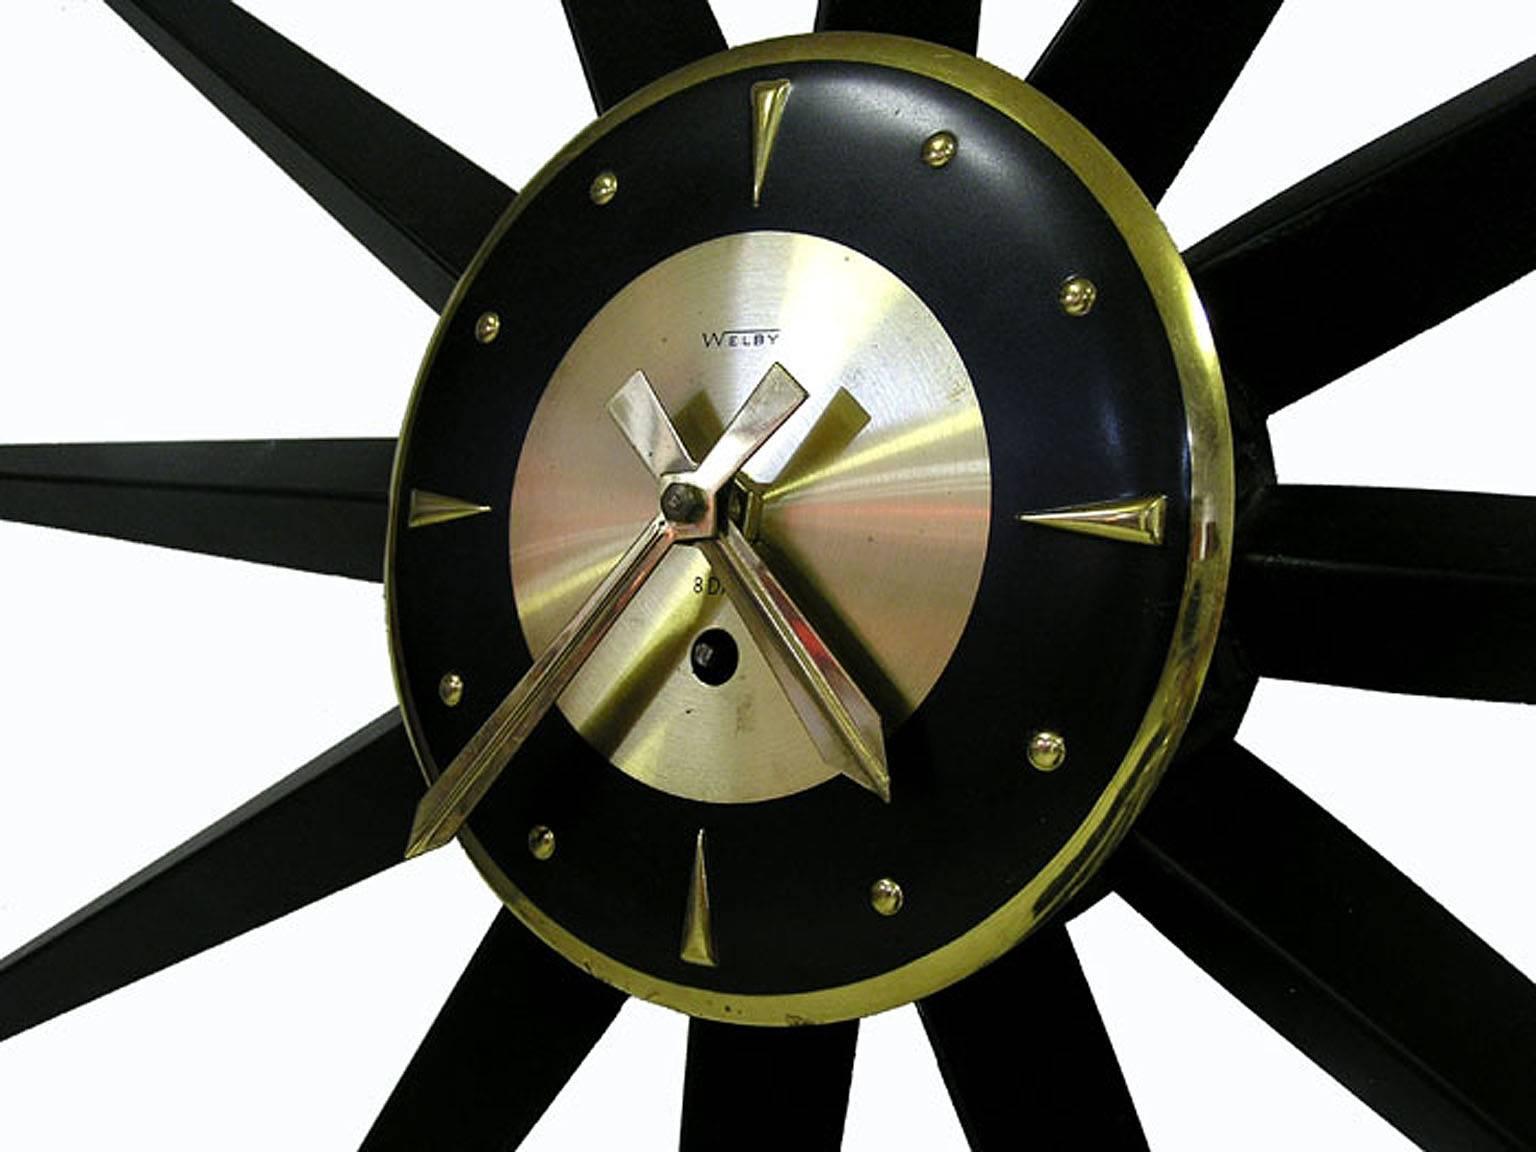 A stunning starburst eight-day wind-up metal wall clock from the 1950s Mid-Century Modern era by Welby of Germany. Clock is in excellent working condition and comes with the original key. Measures 35